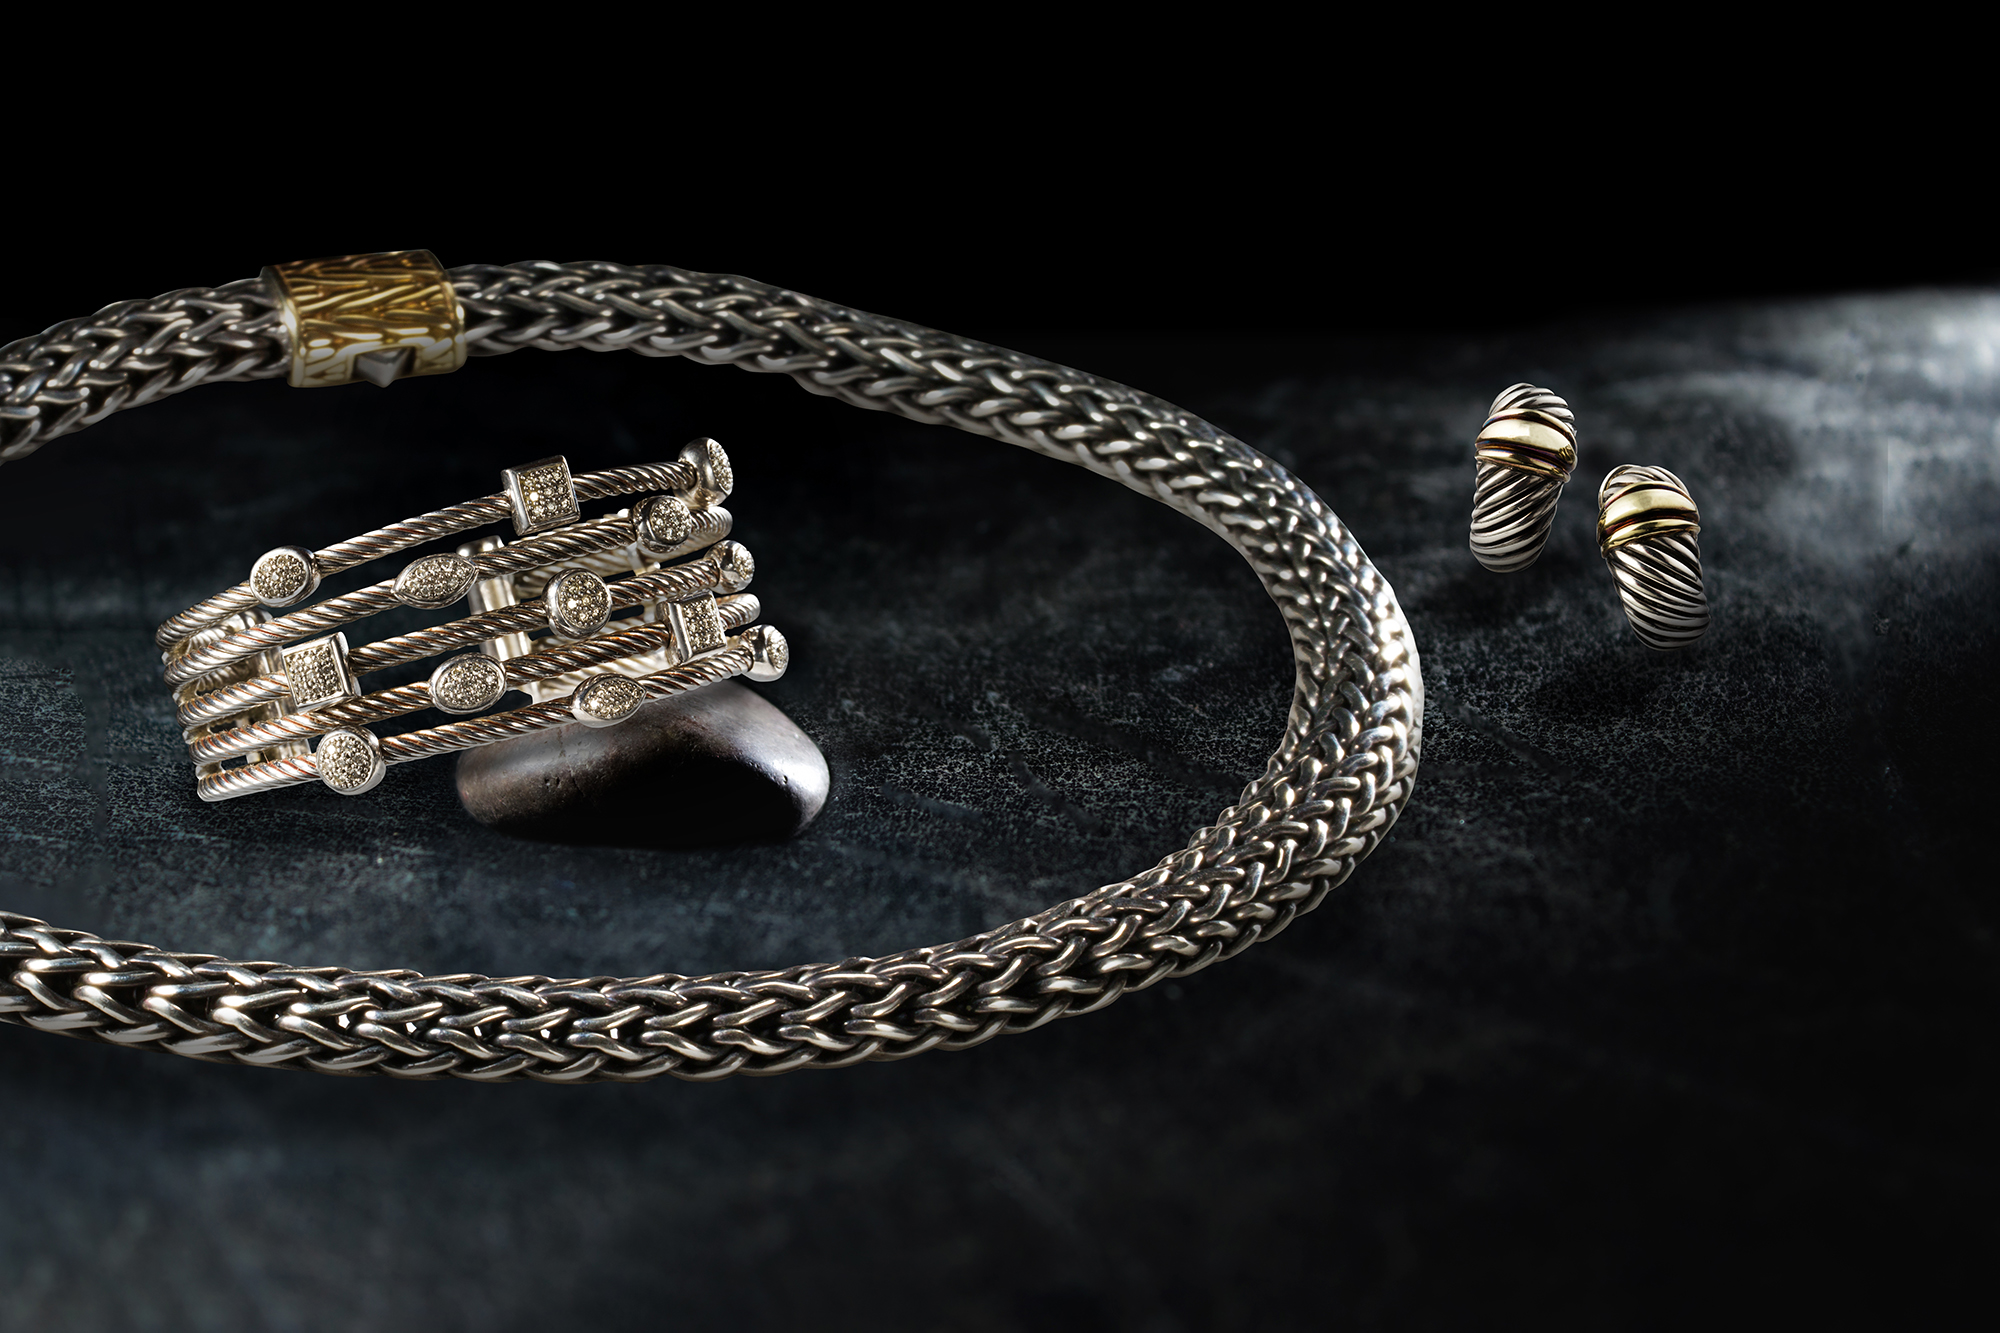 Left: A diamond and sterling silver bracelet, David Yurman. Right: A sterling silver and eighteen karat gold necklace and ear clips suite, John Hardy.